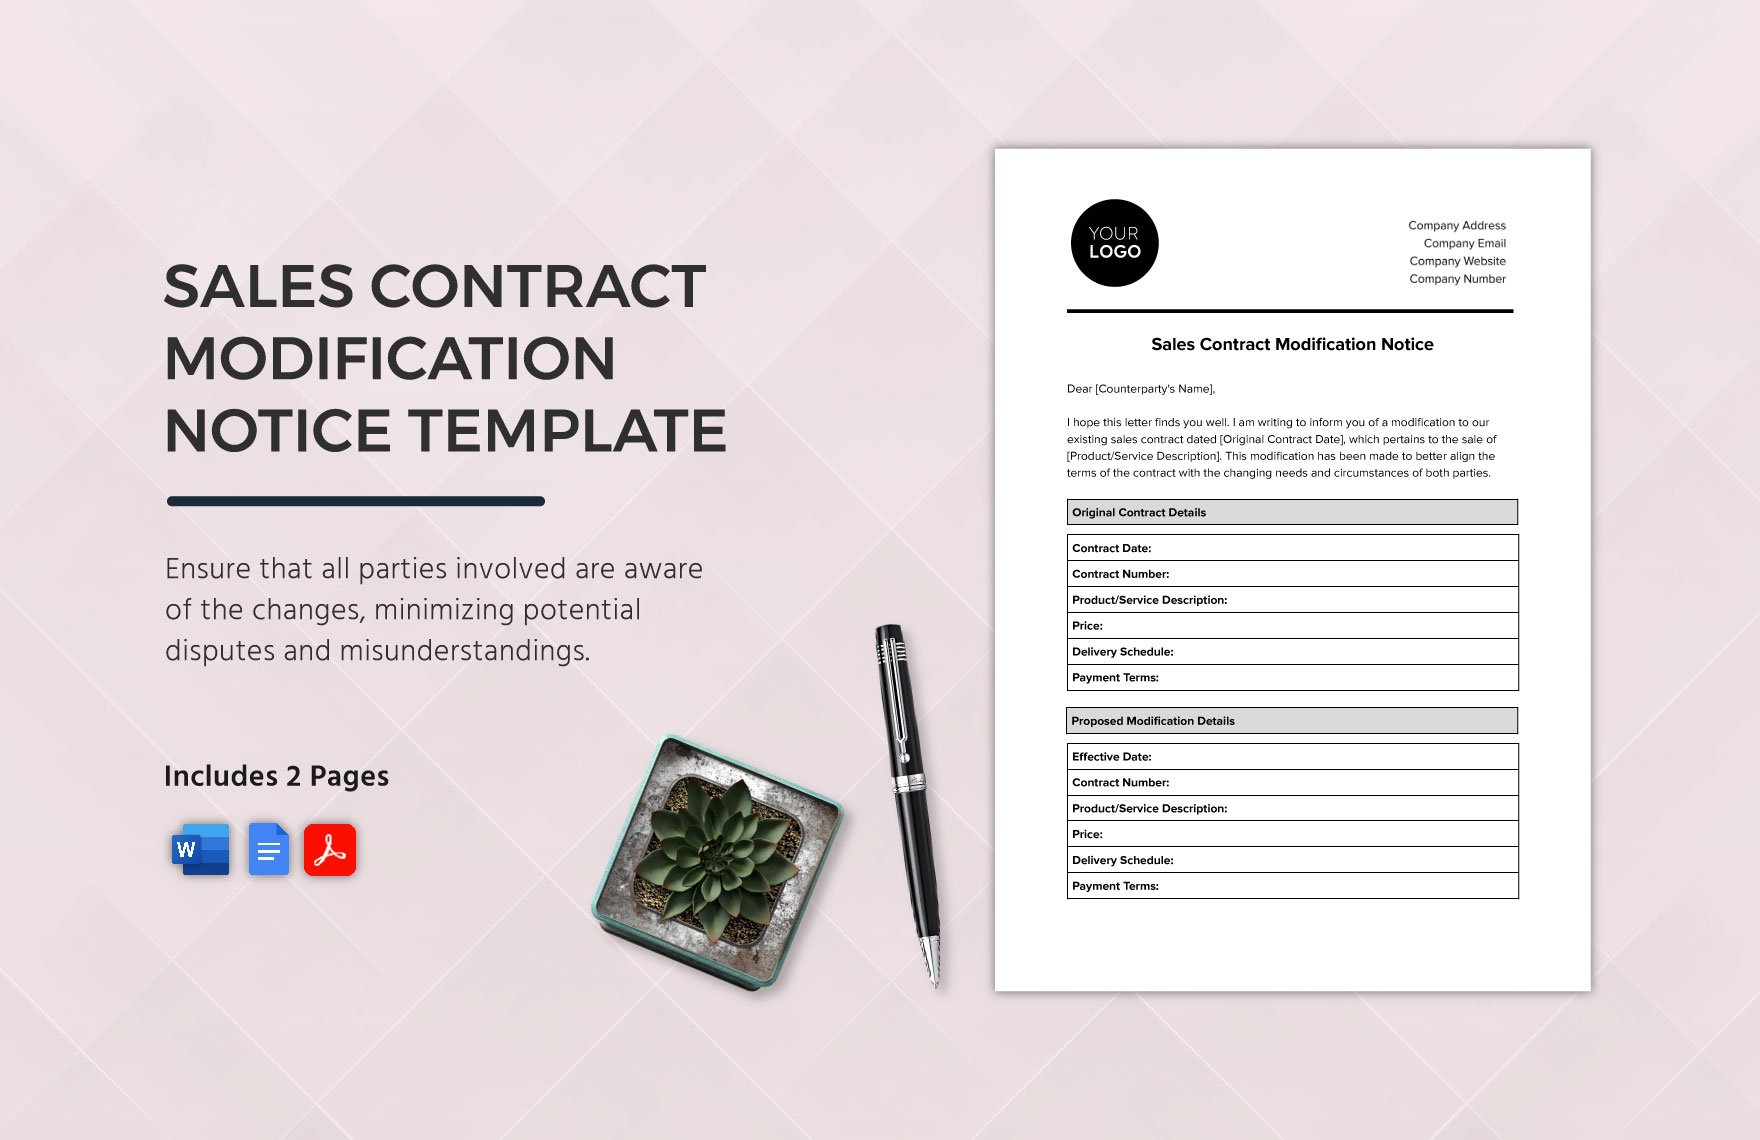 Sales Contract Modification Notice Template in Word, Google Docs, PDF